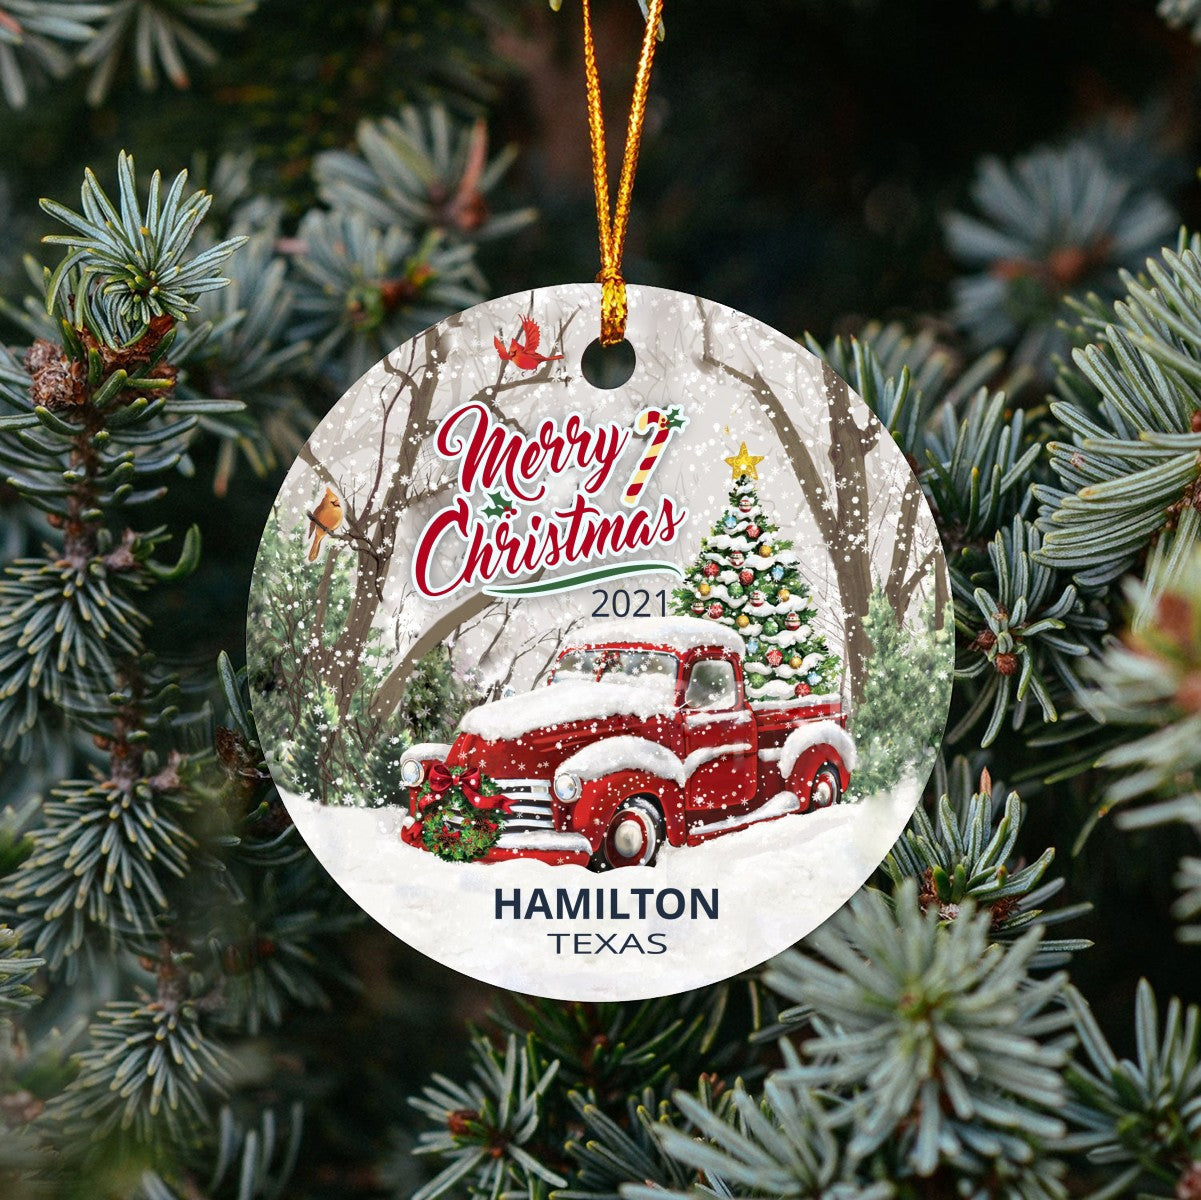 Christmas Tree Ornaments Hamilton - Ornament With Name City, State Hamilton Texas TX Ornament - Red Truck Xmas Ornaments 3'' Plastic Gift For Family, Friend And Housewarming